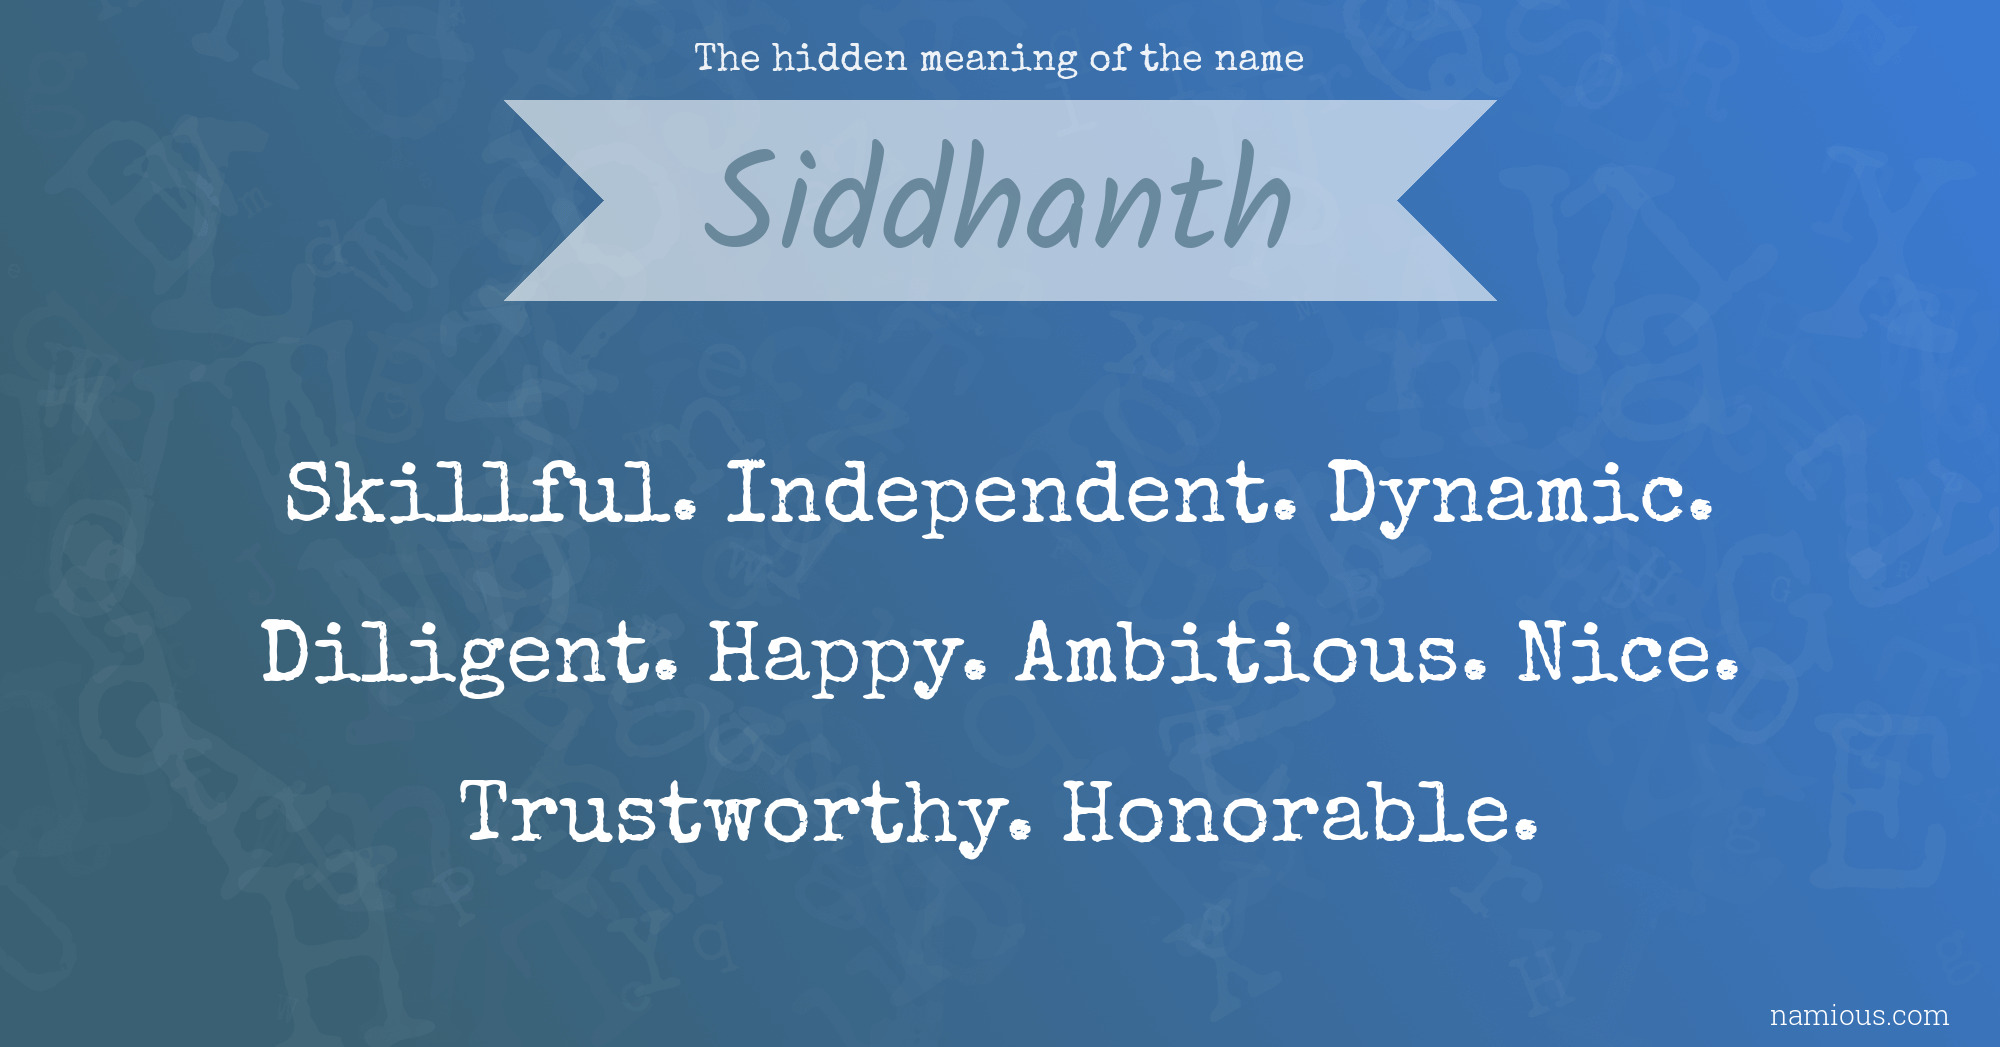 The hidden meaning of the name Siddhanth